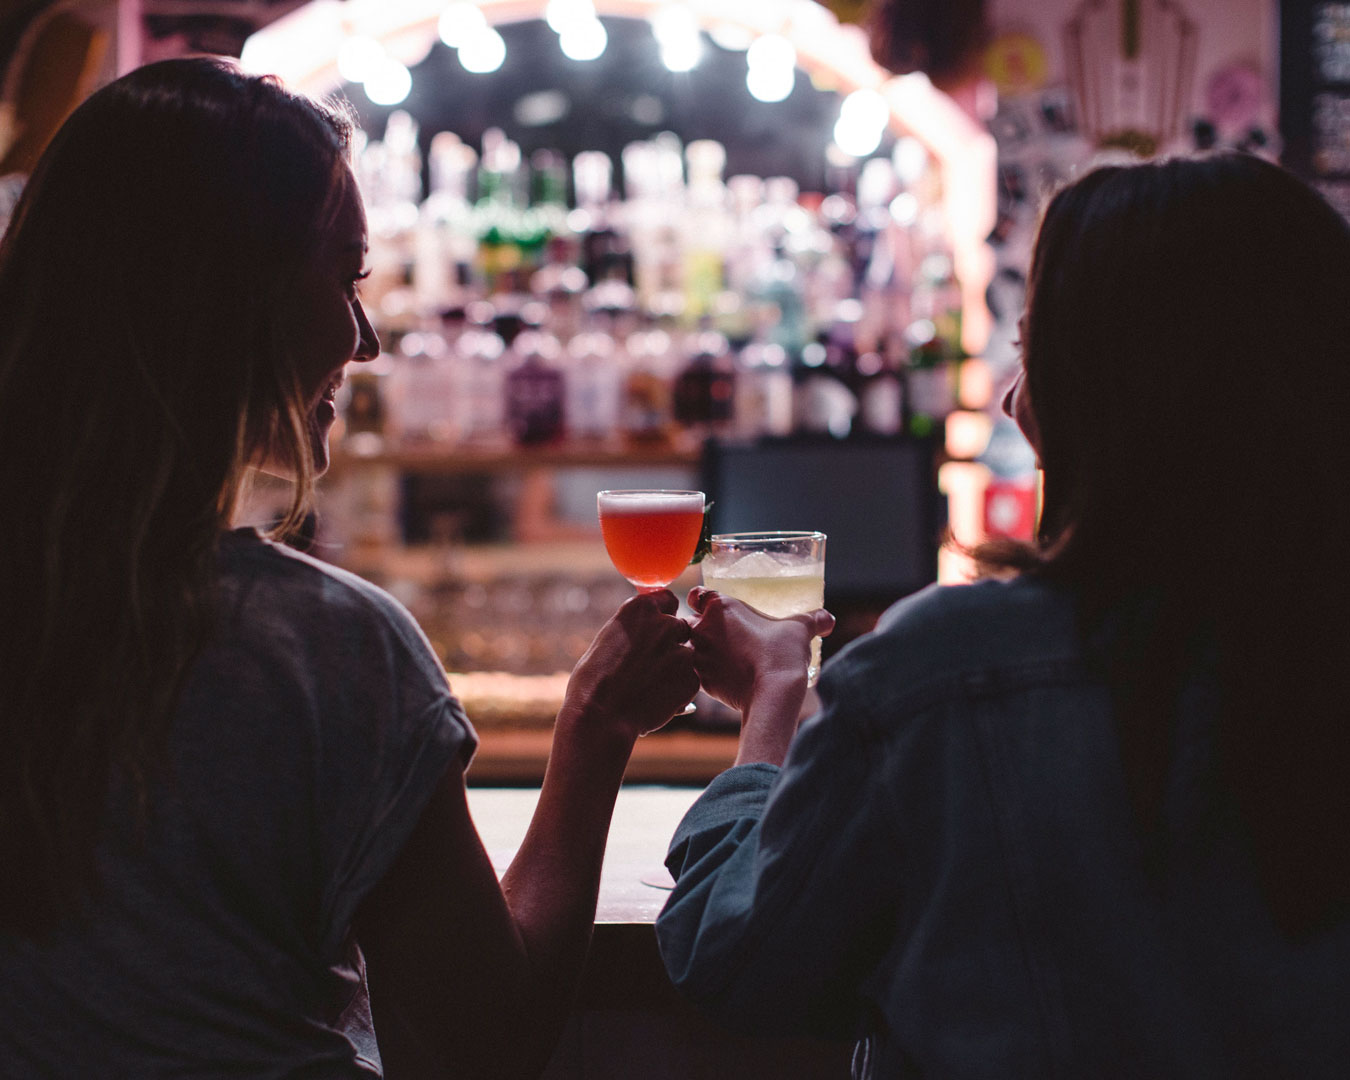 Women with cocktails at bar